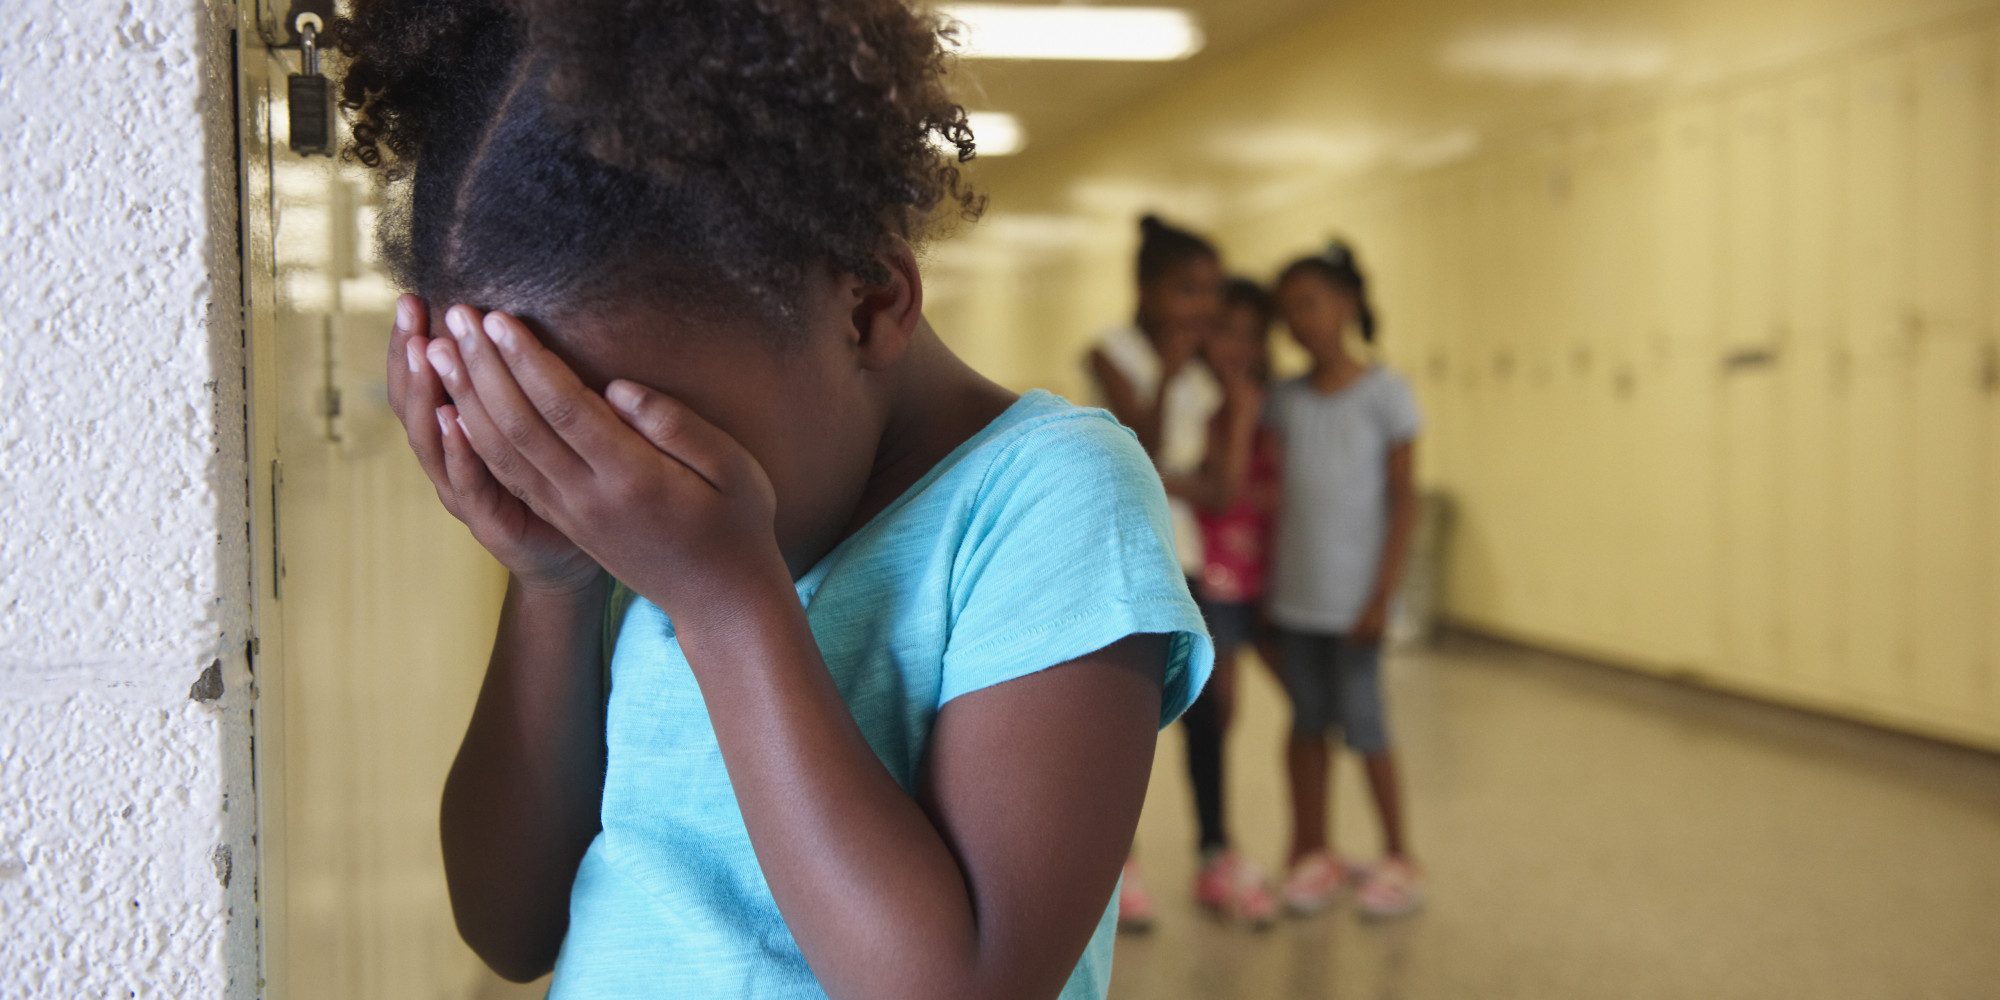 Psychological effects of bullying on children